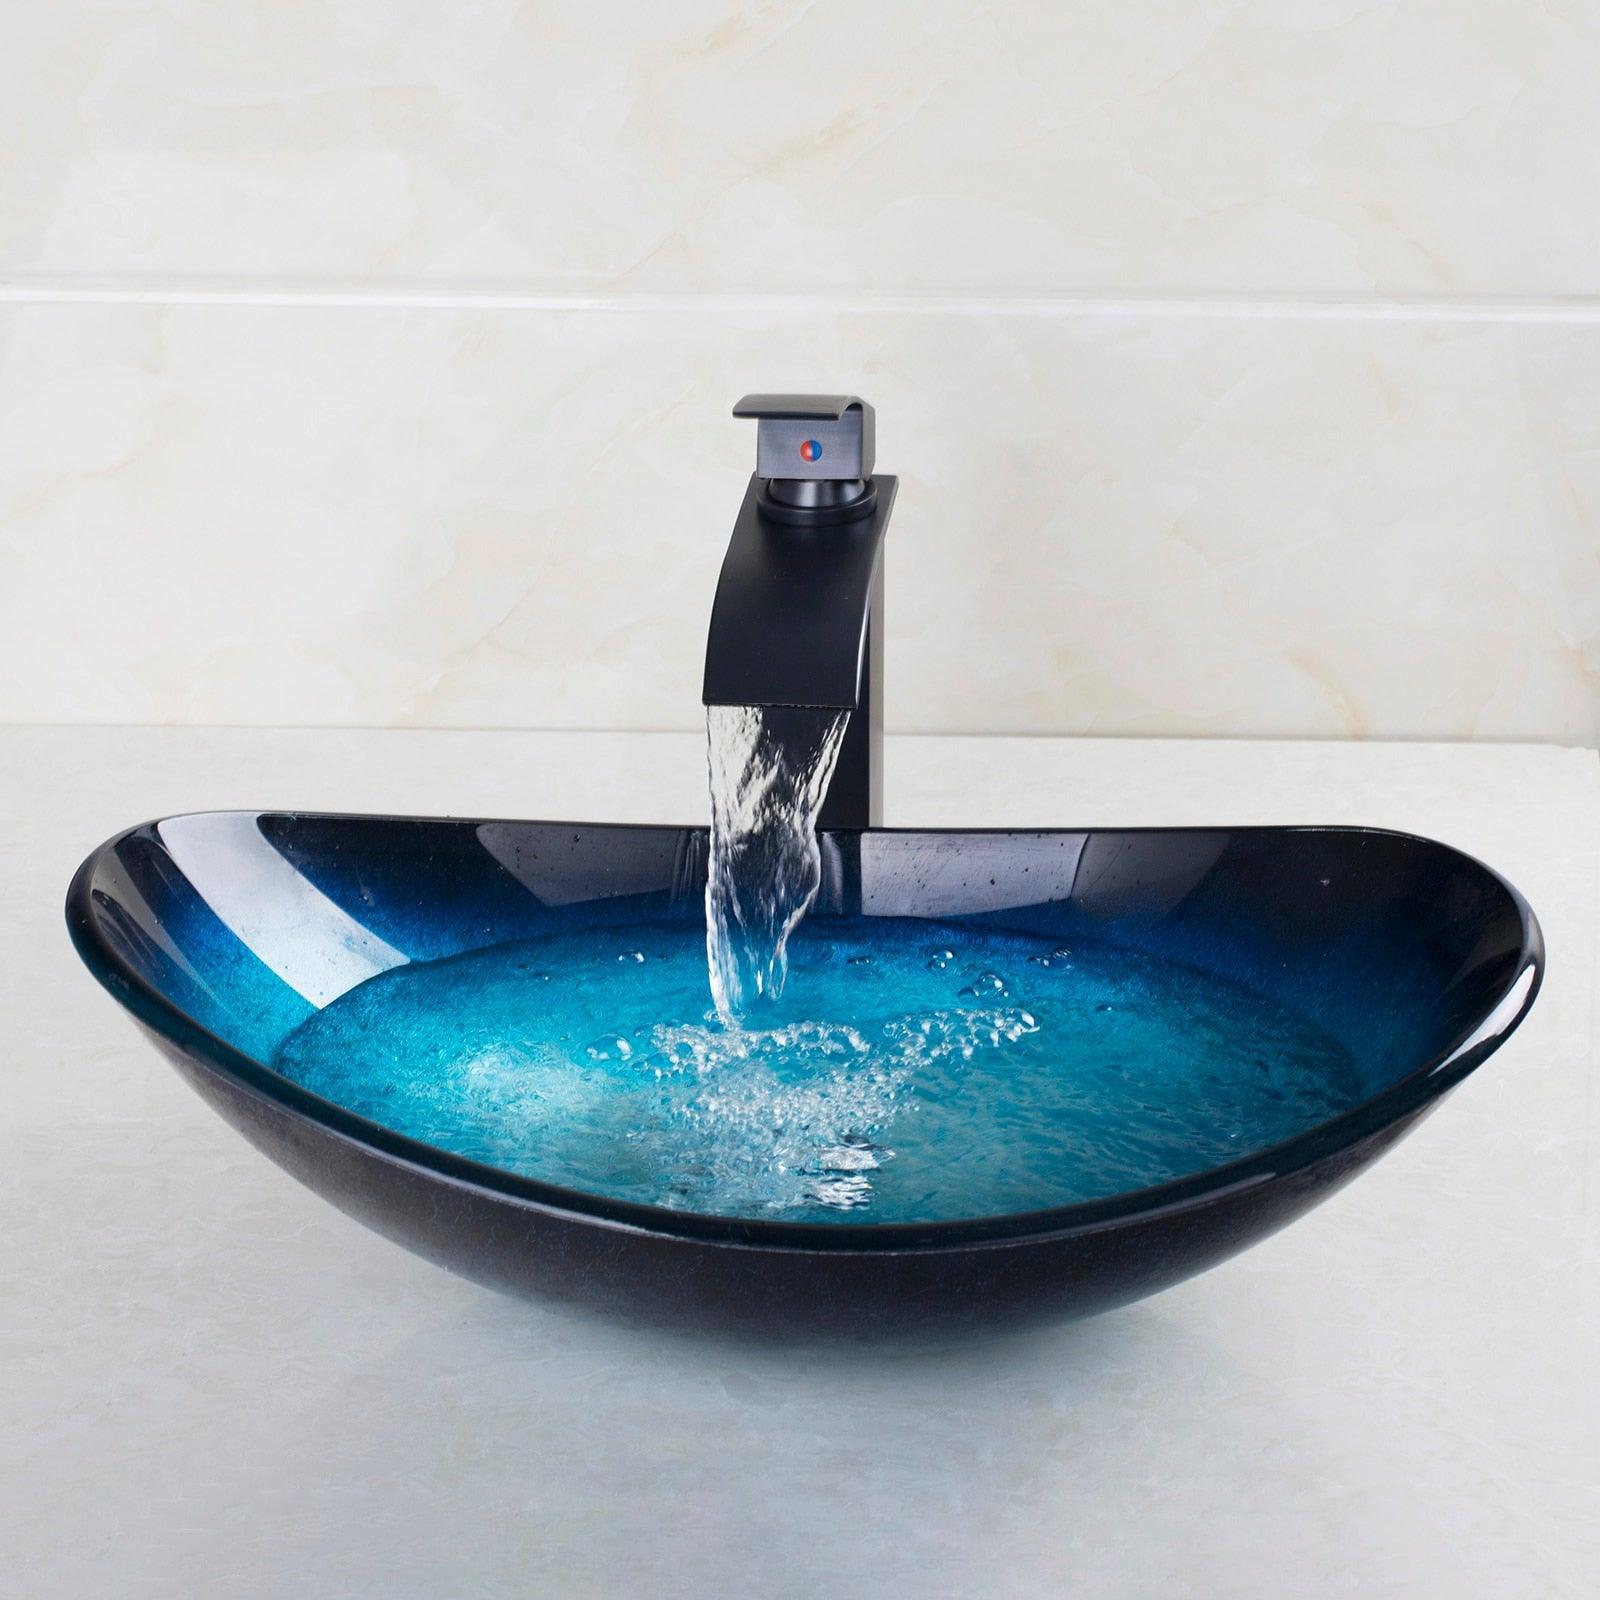 Corner Blue Oval Bathroom Glass Basin Sink With Combo Waterfall Black Faucet Set - Lush Home Gallery